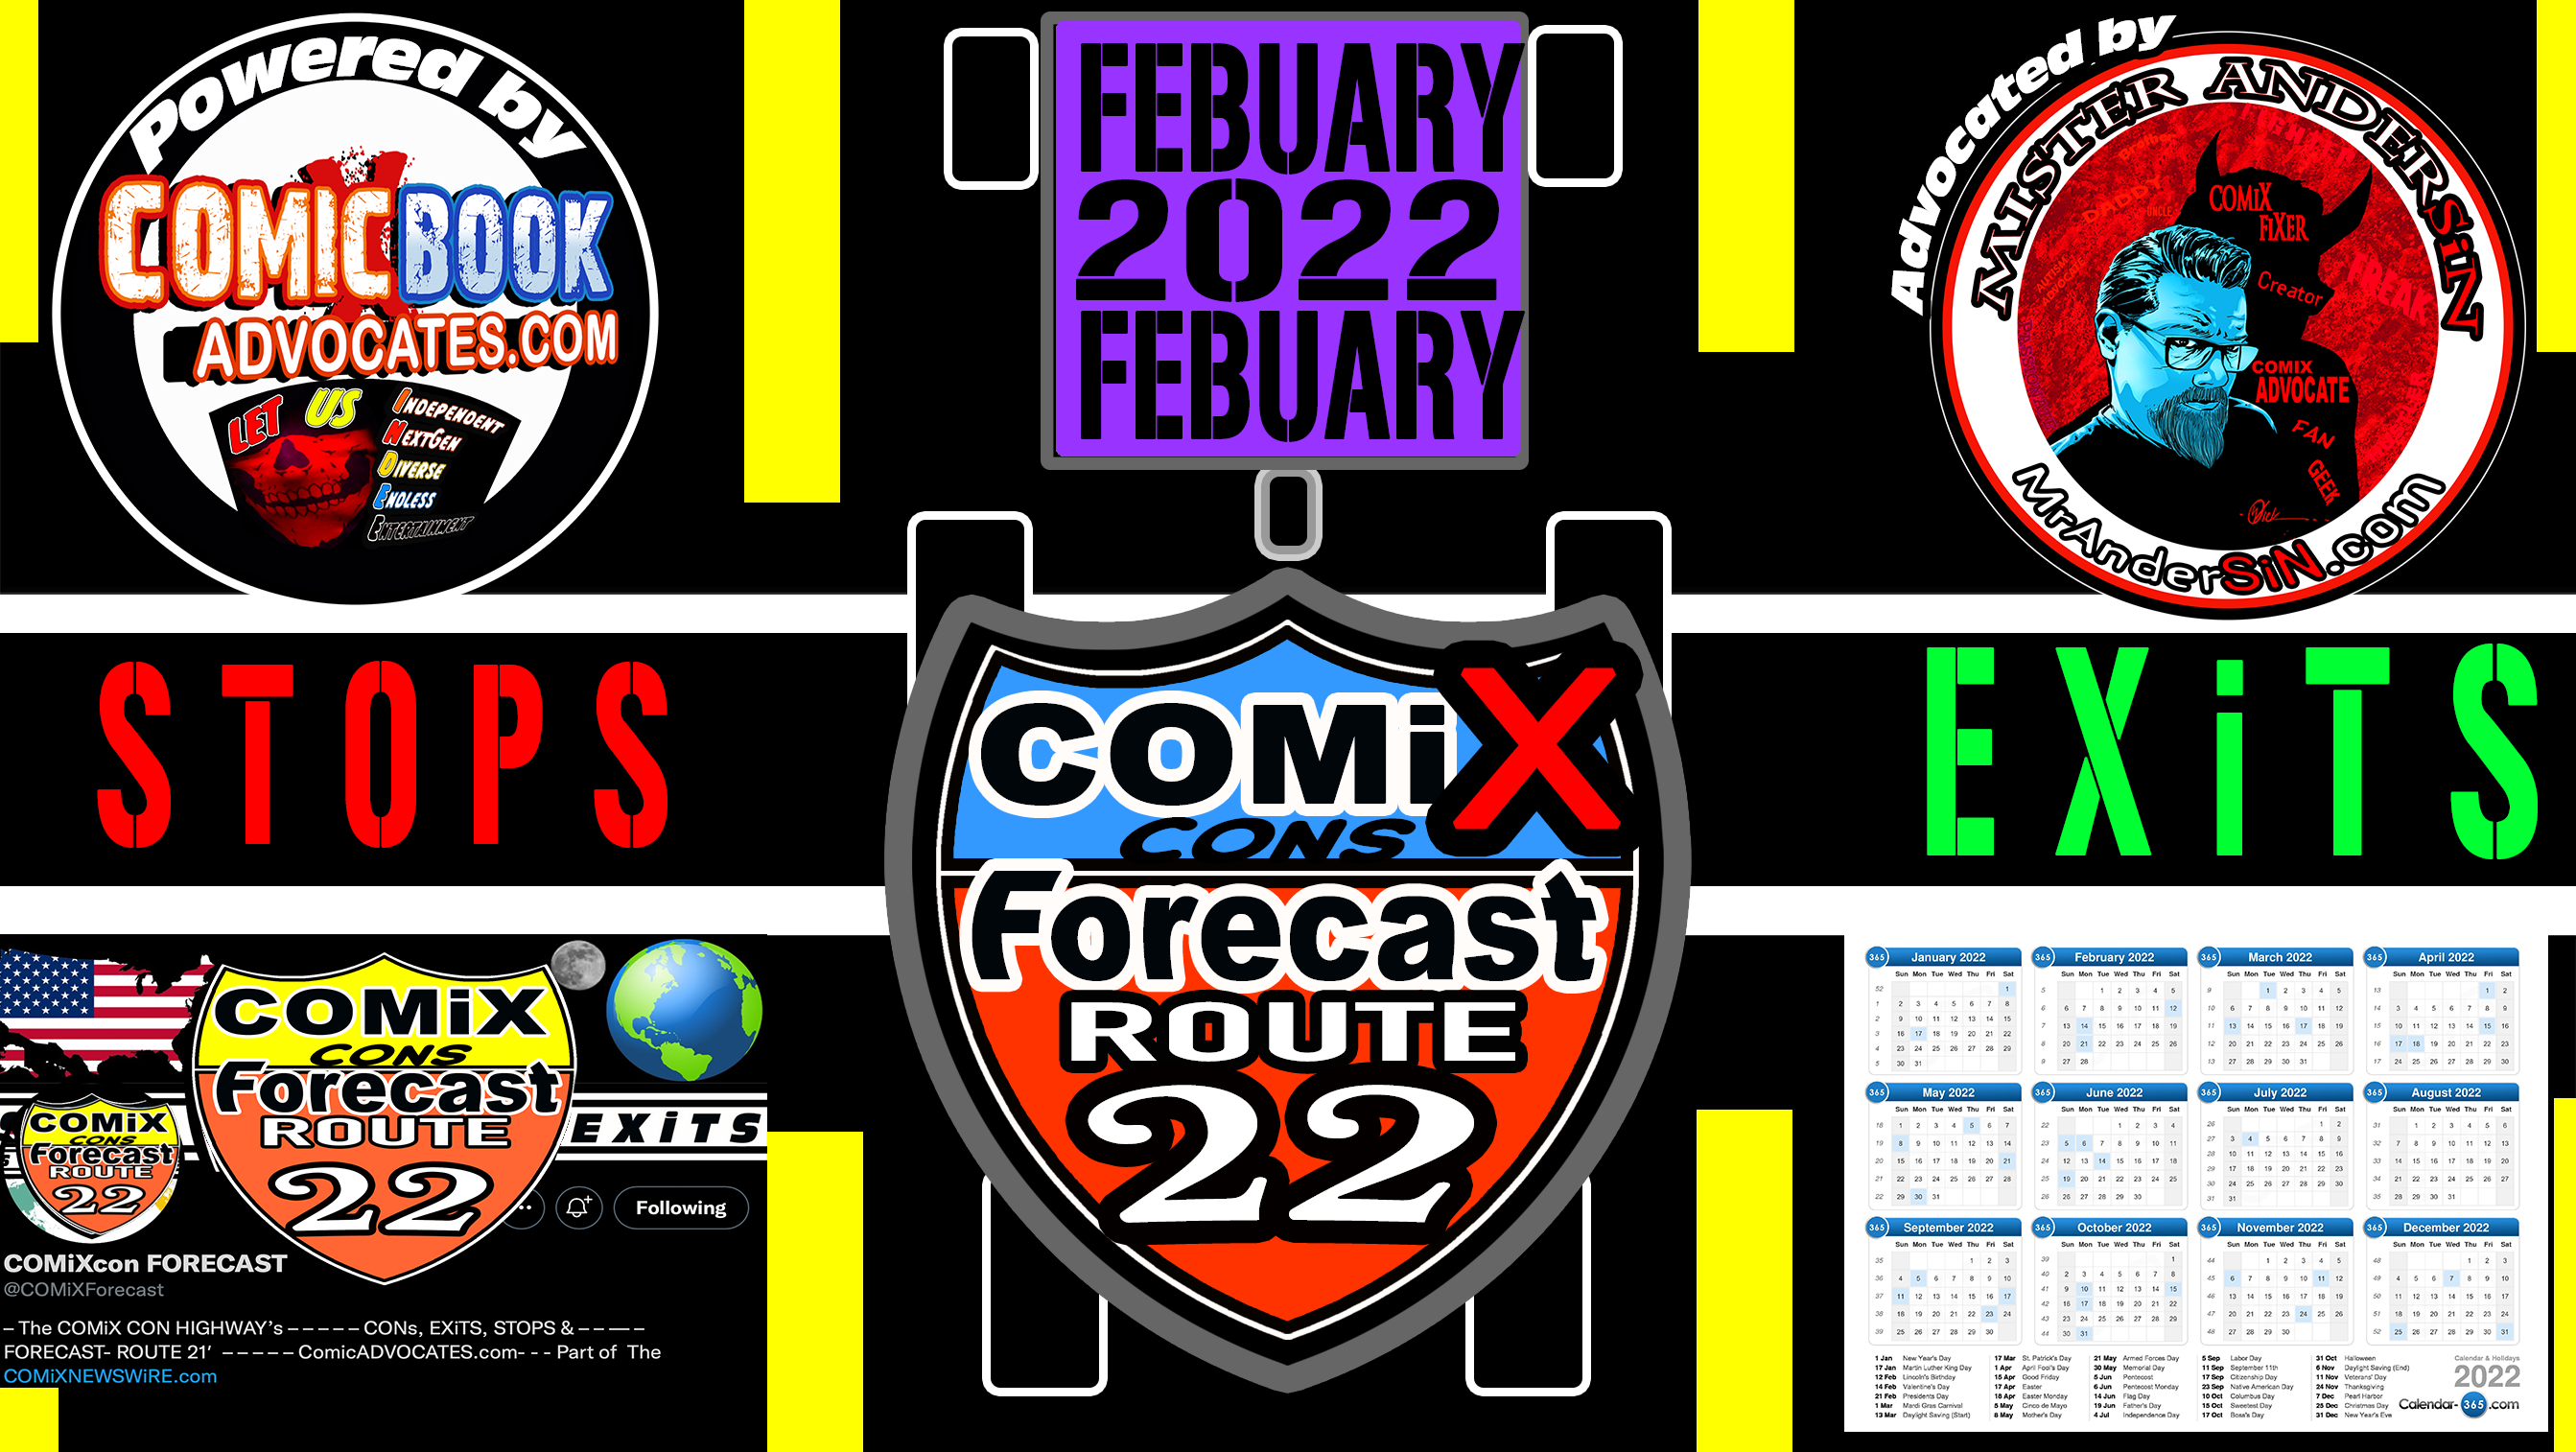 The COMiXcon FORECAST CENTER -Week 7 of ’22